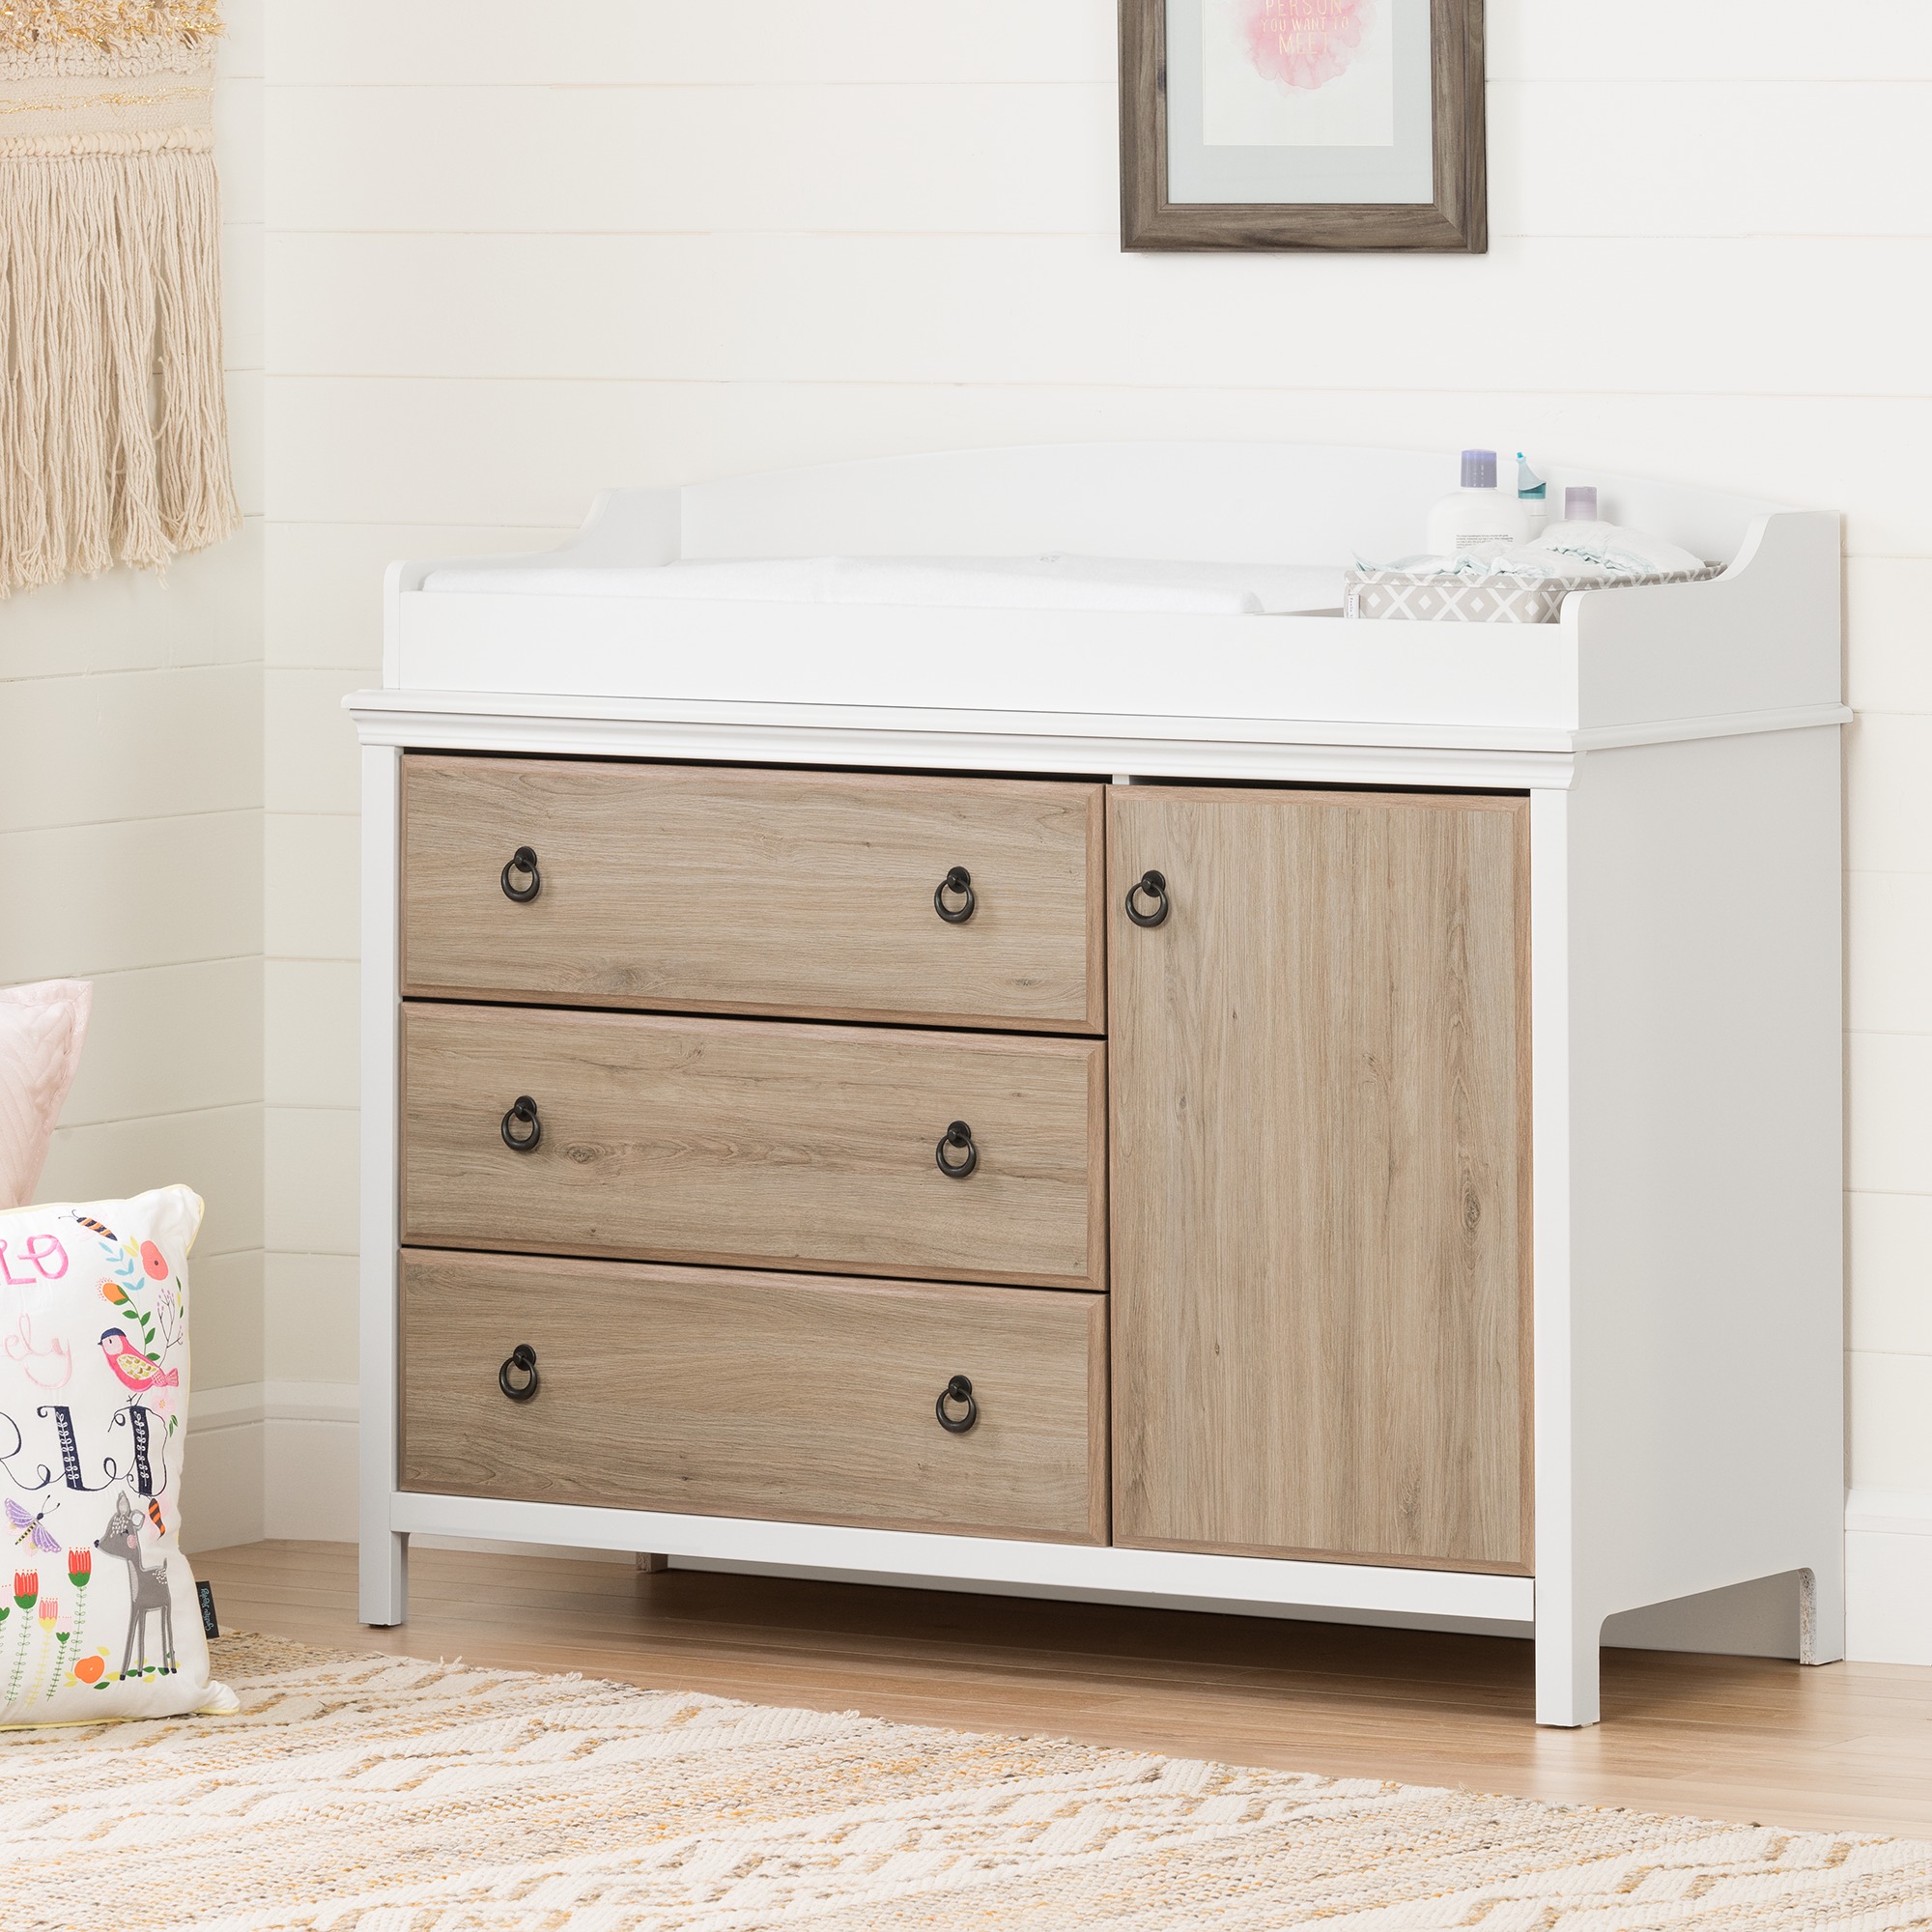 South Shore Catimini Changing Table with Removable Changing Station- Pure White and Rustic Oak